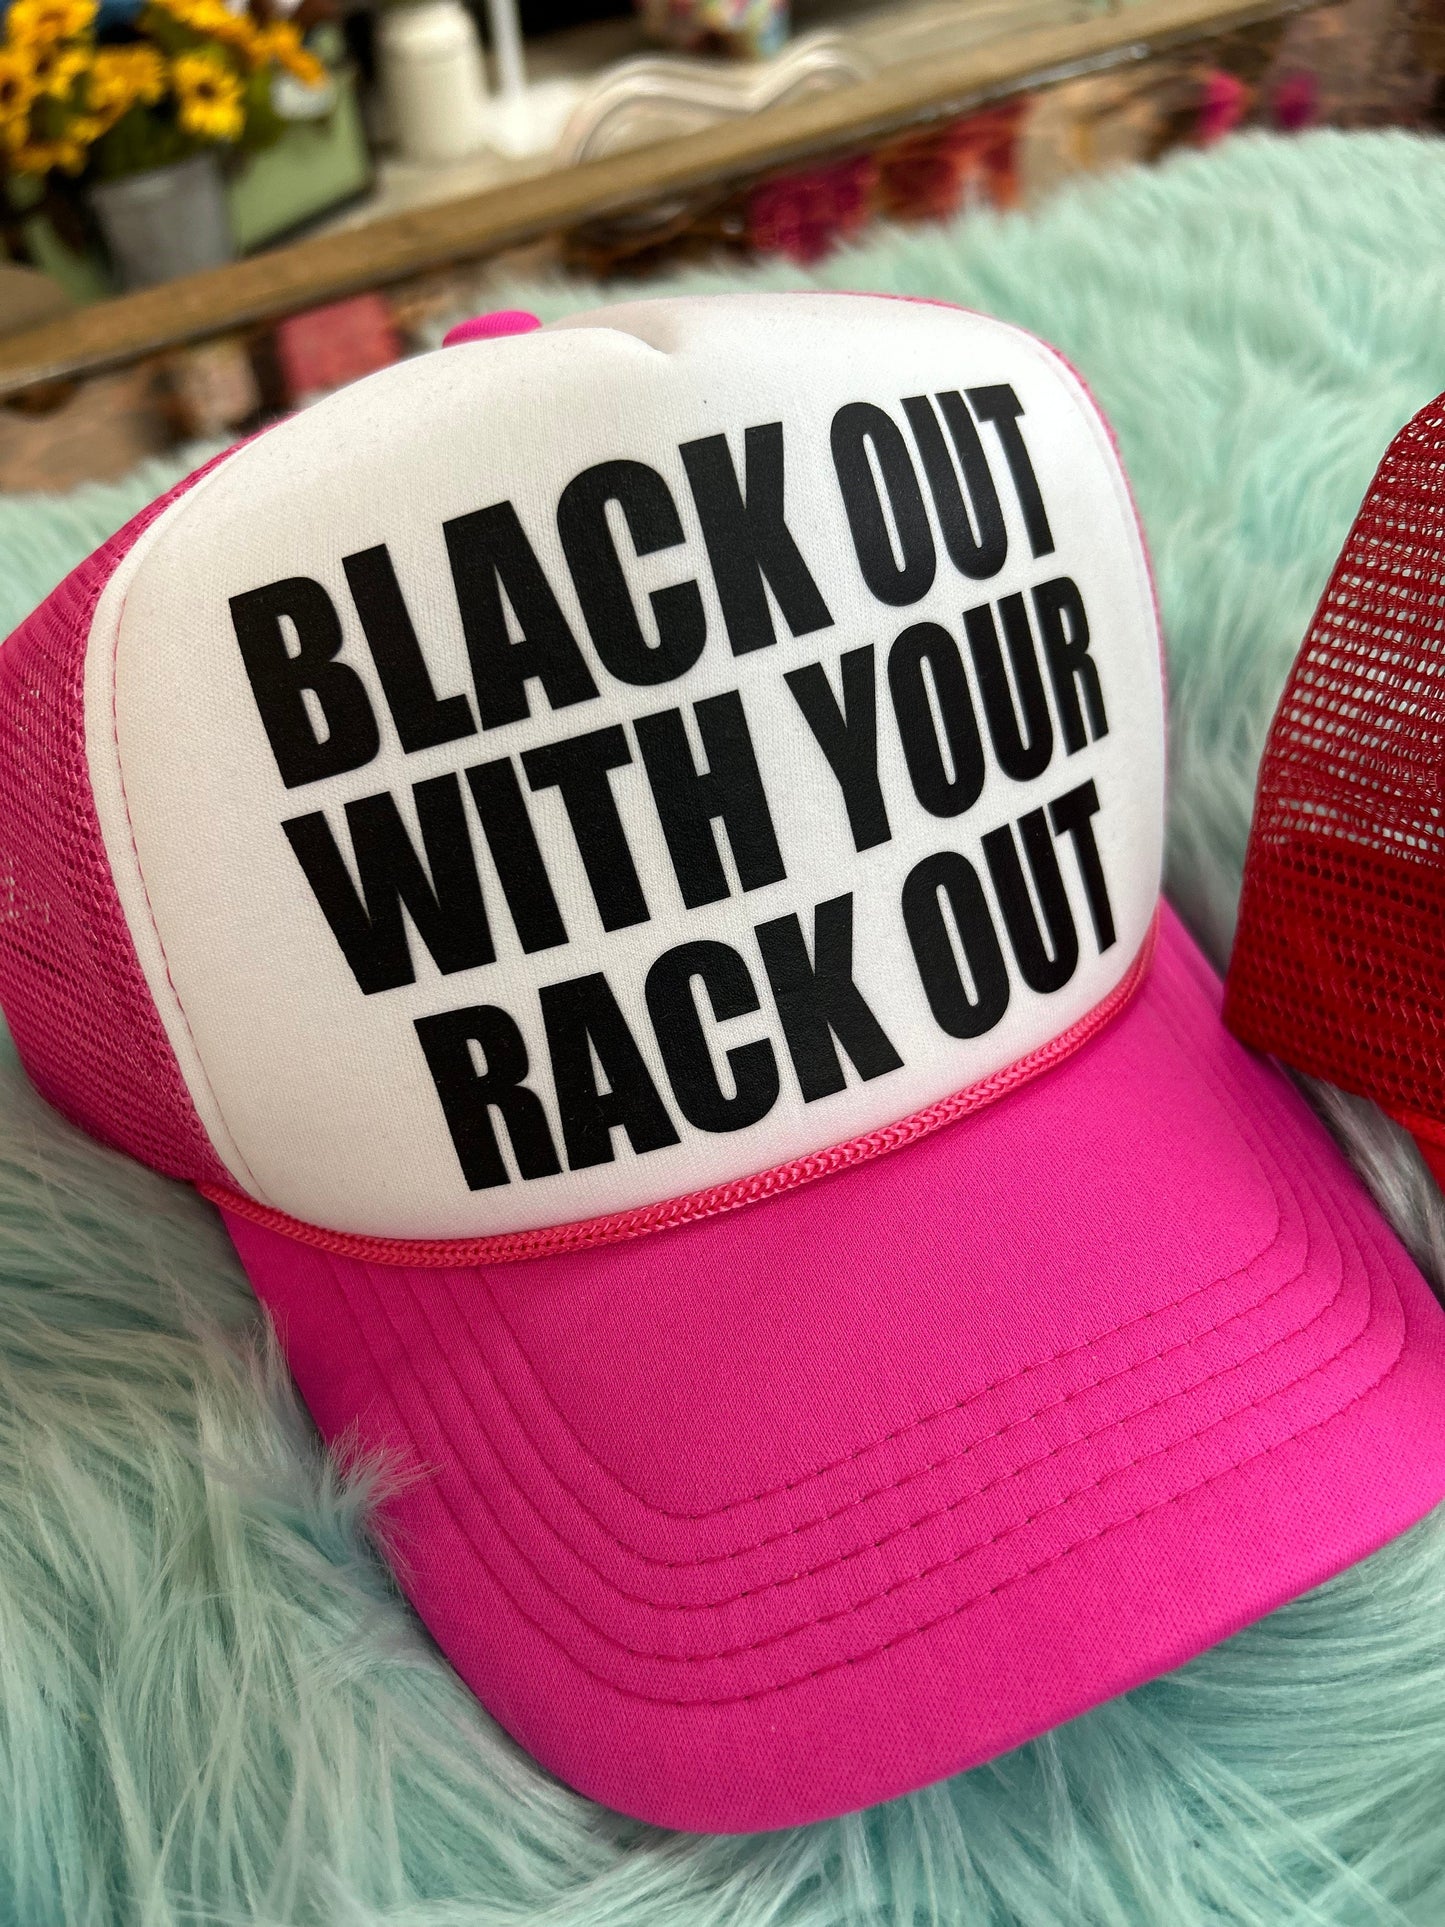 Black Out With Your Rack Out Trucker Hat